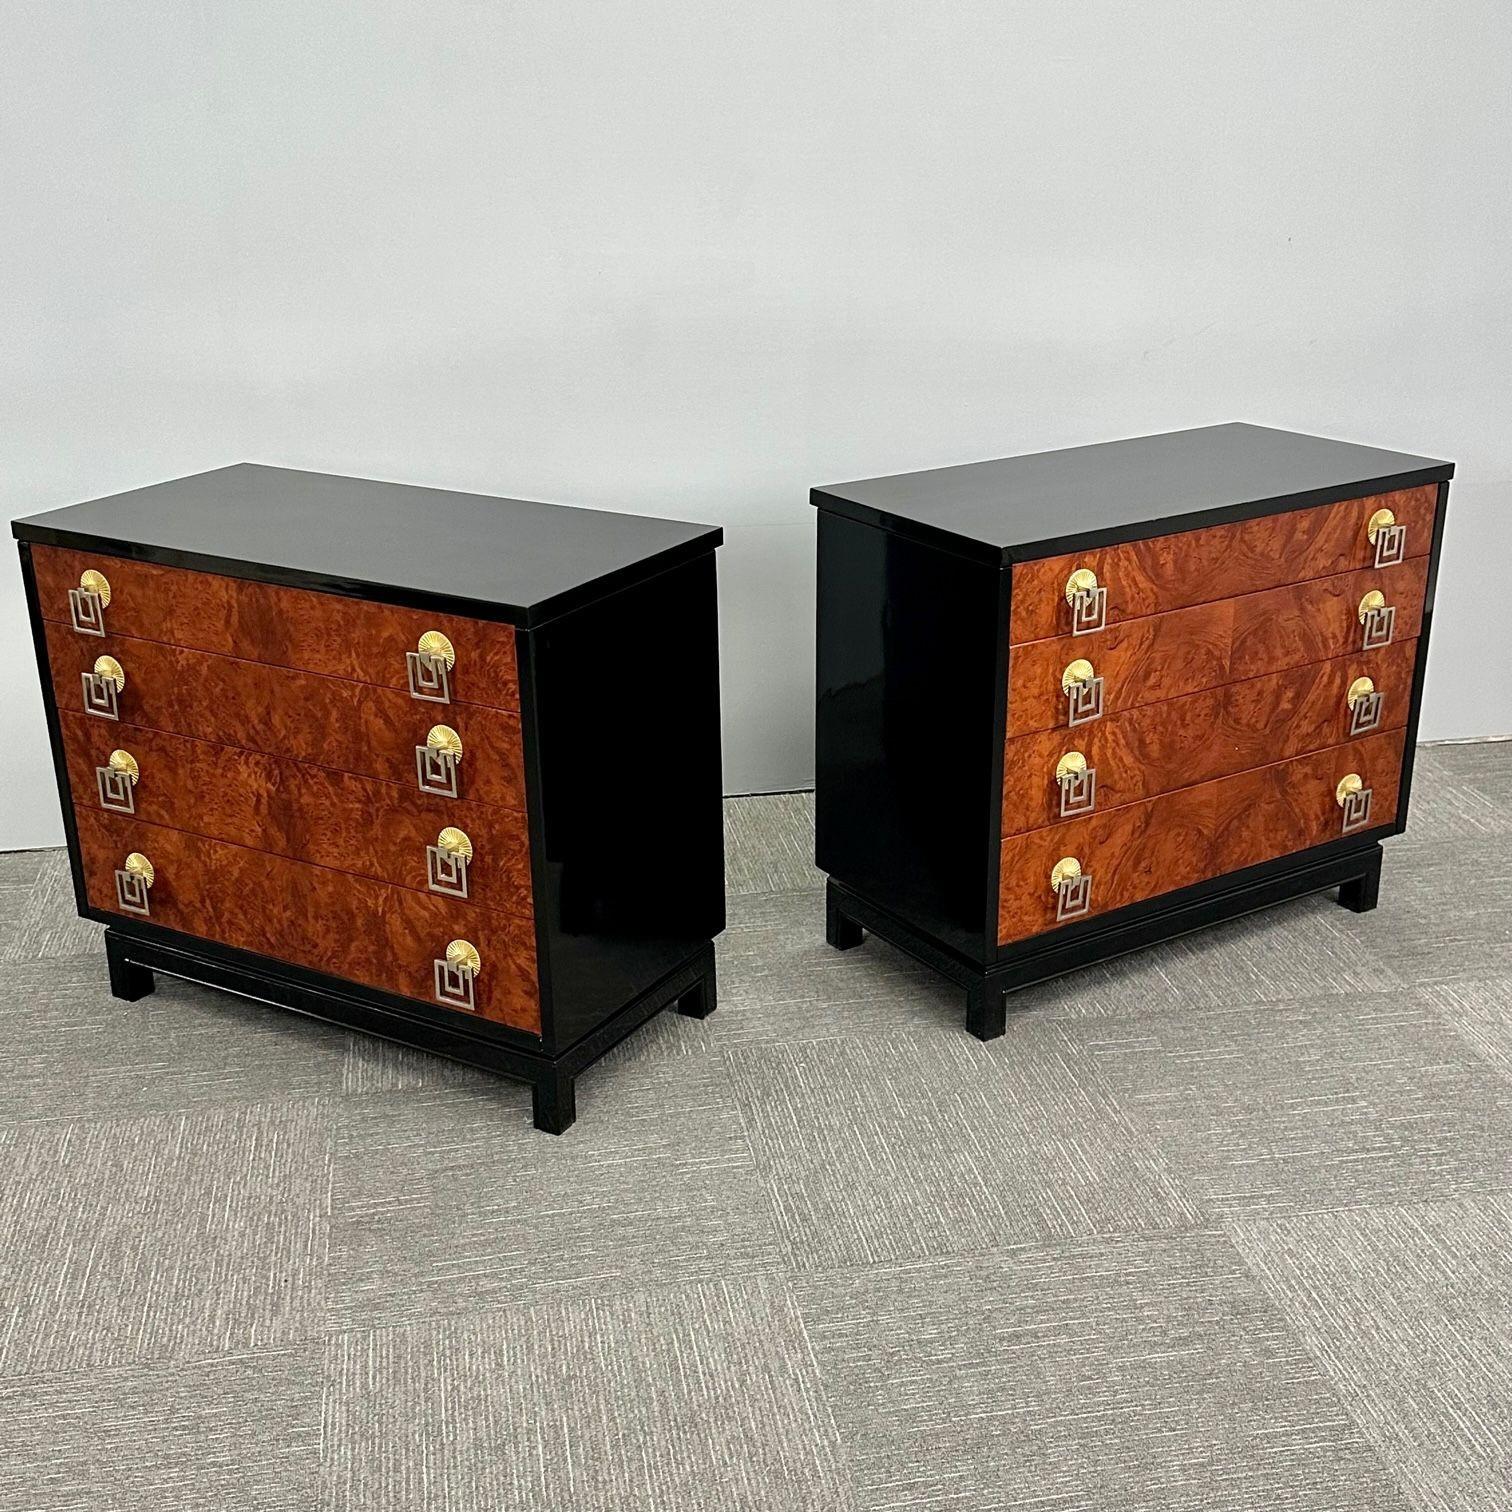 Italian Mid-Century Modern Renzo Retulli Style Chests / Commodes / Nightstands In Good Condition For Sale In Stamford, CT